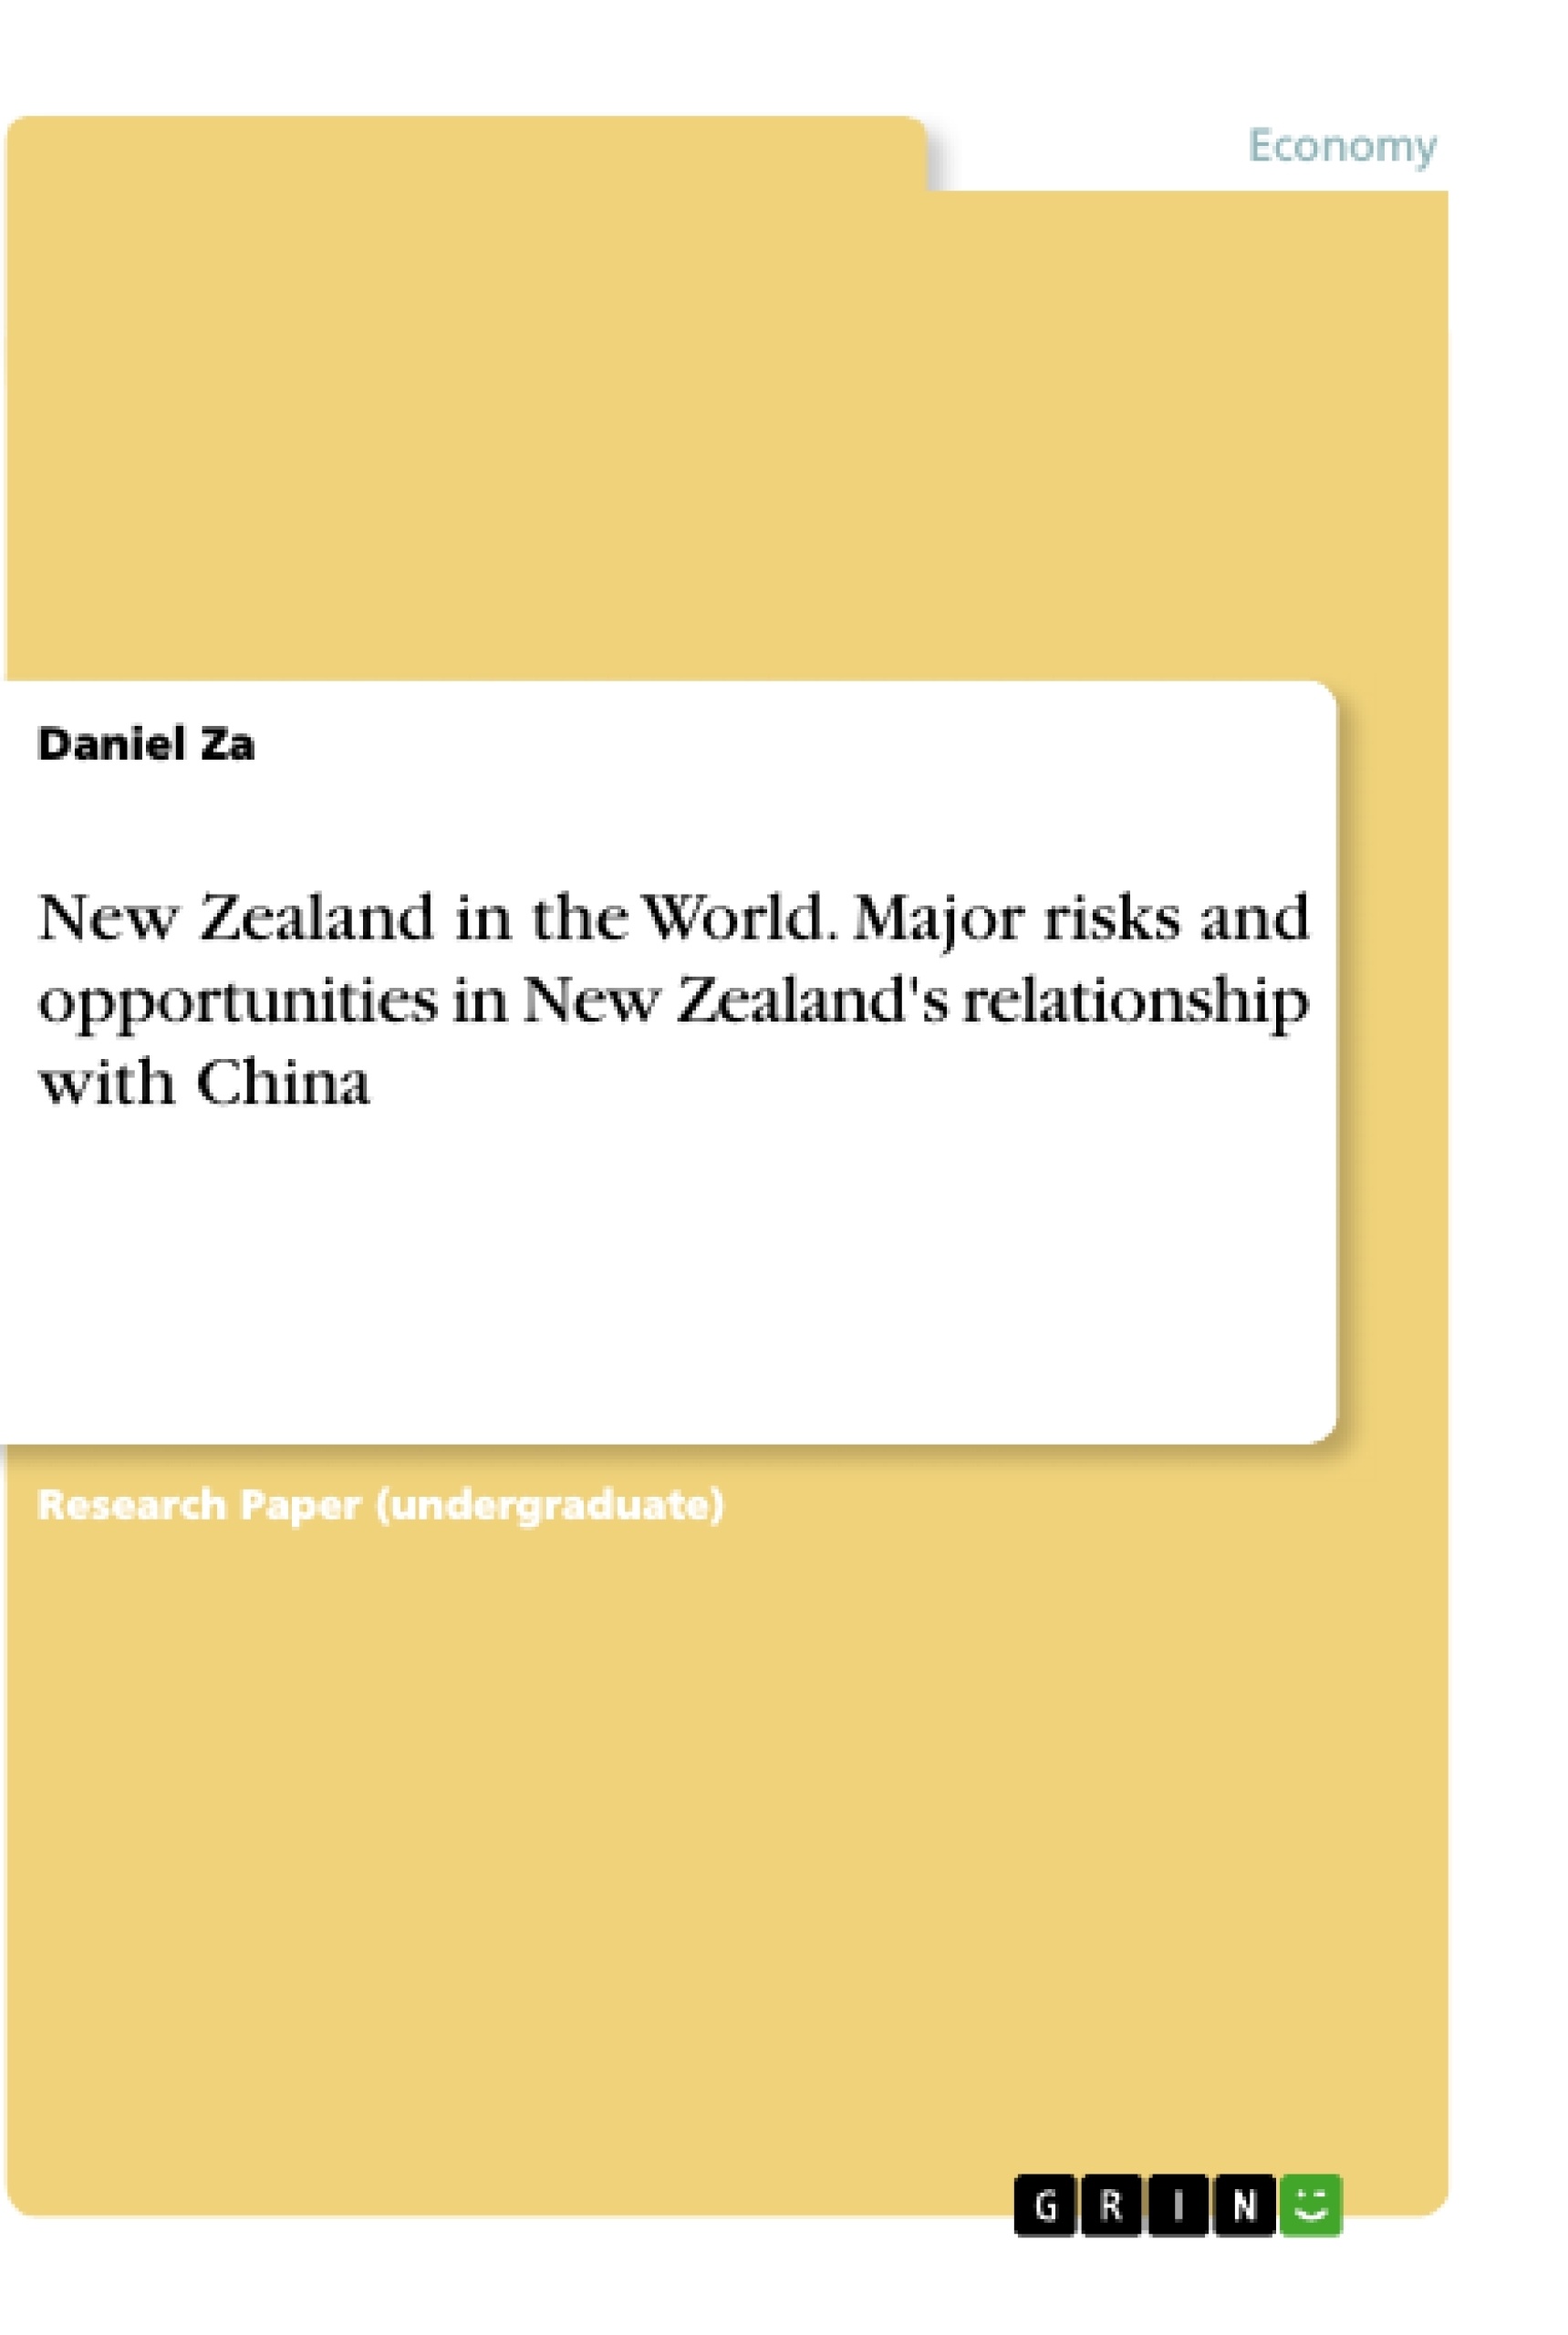 Title: New Zealand in the World. Major risks and opportunities in New Zealand's relationship with China